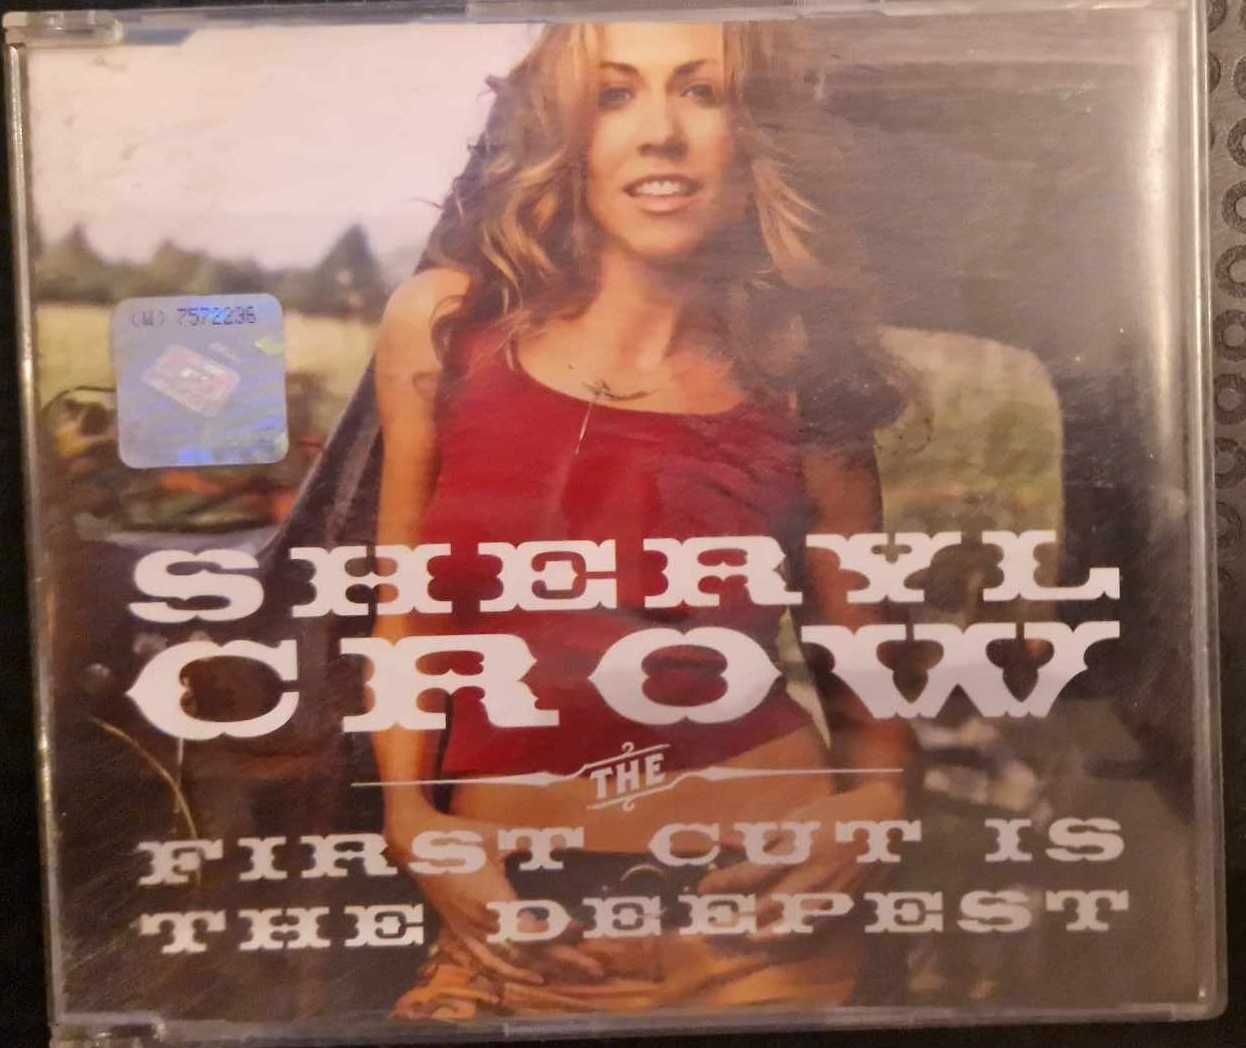 sheryl crow first cut is the deepest CD